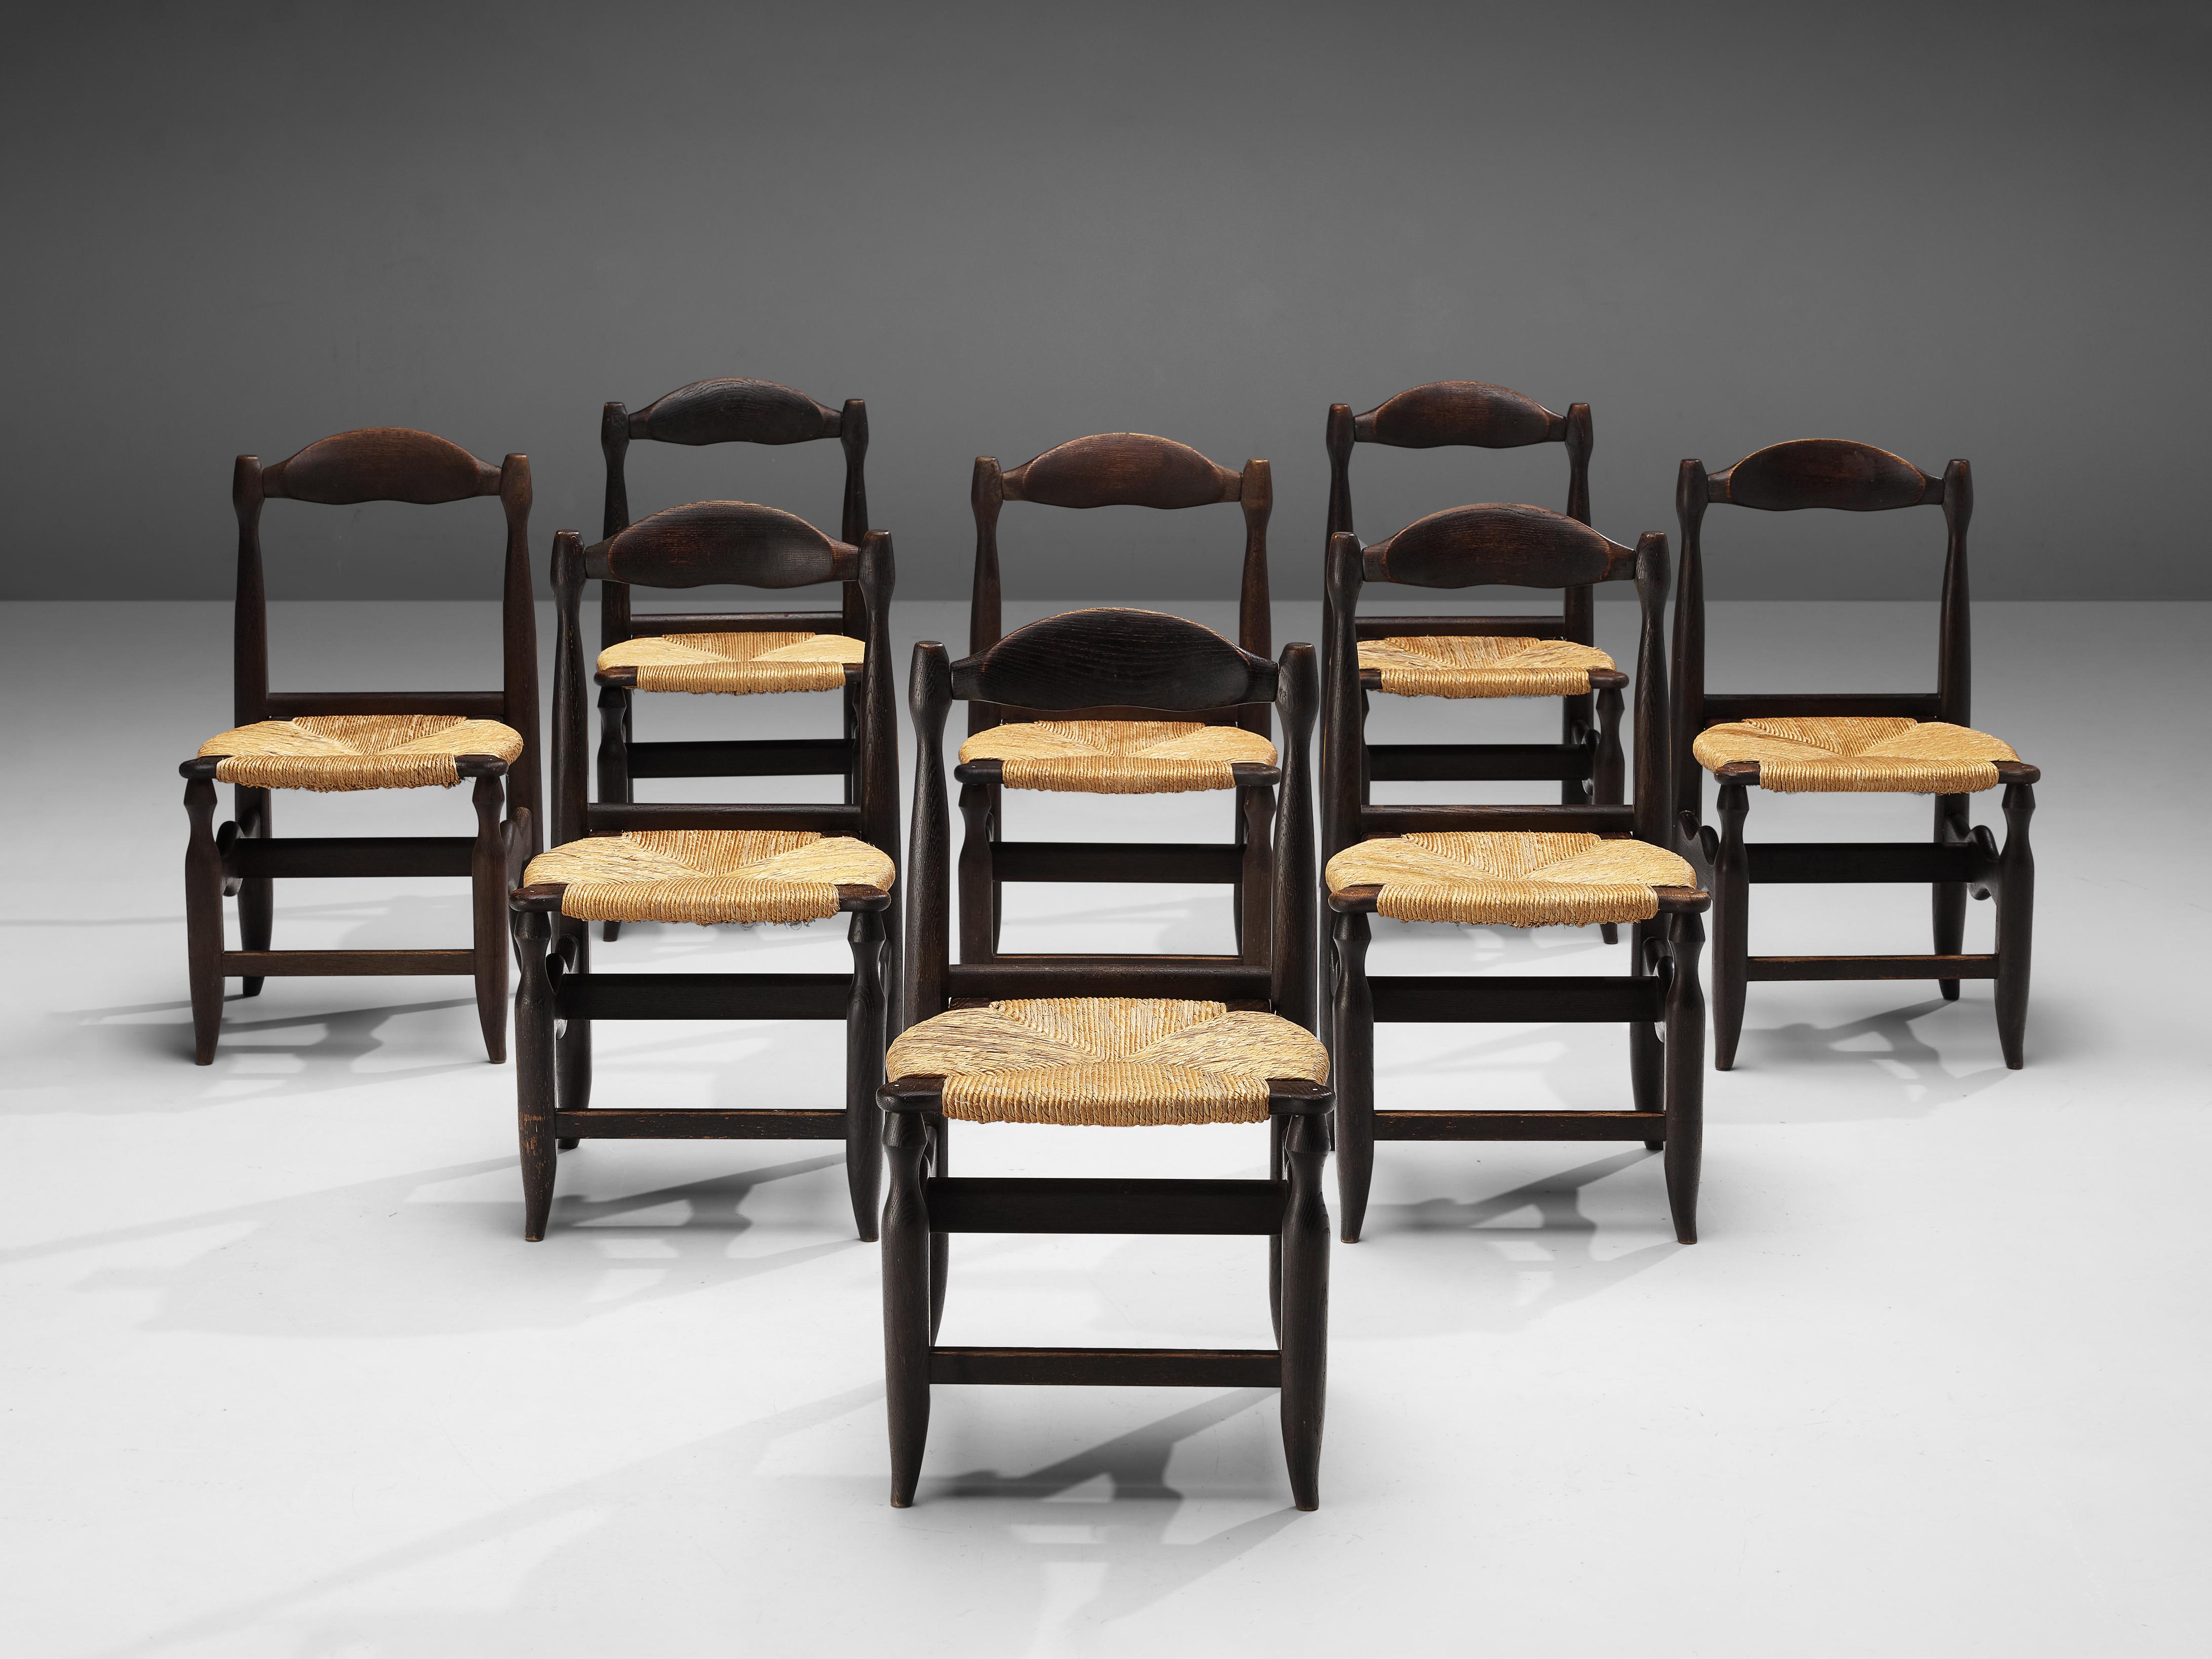 Guillerme & Chambron for Votre Maison, set of eight dining chairs, oak, rush, France, 1960s

Beautifully shaped chairs in patinated oak by French designer duo Jacques Chambron and Robert Guillerme. These dining chairs show beautiful lines in every